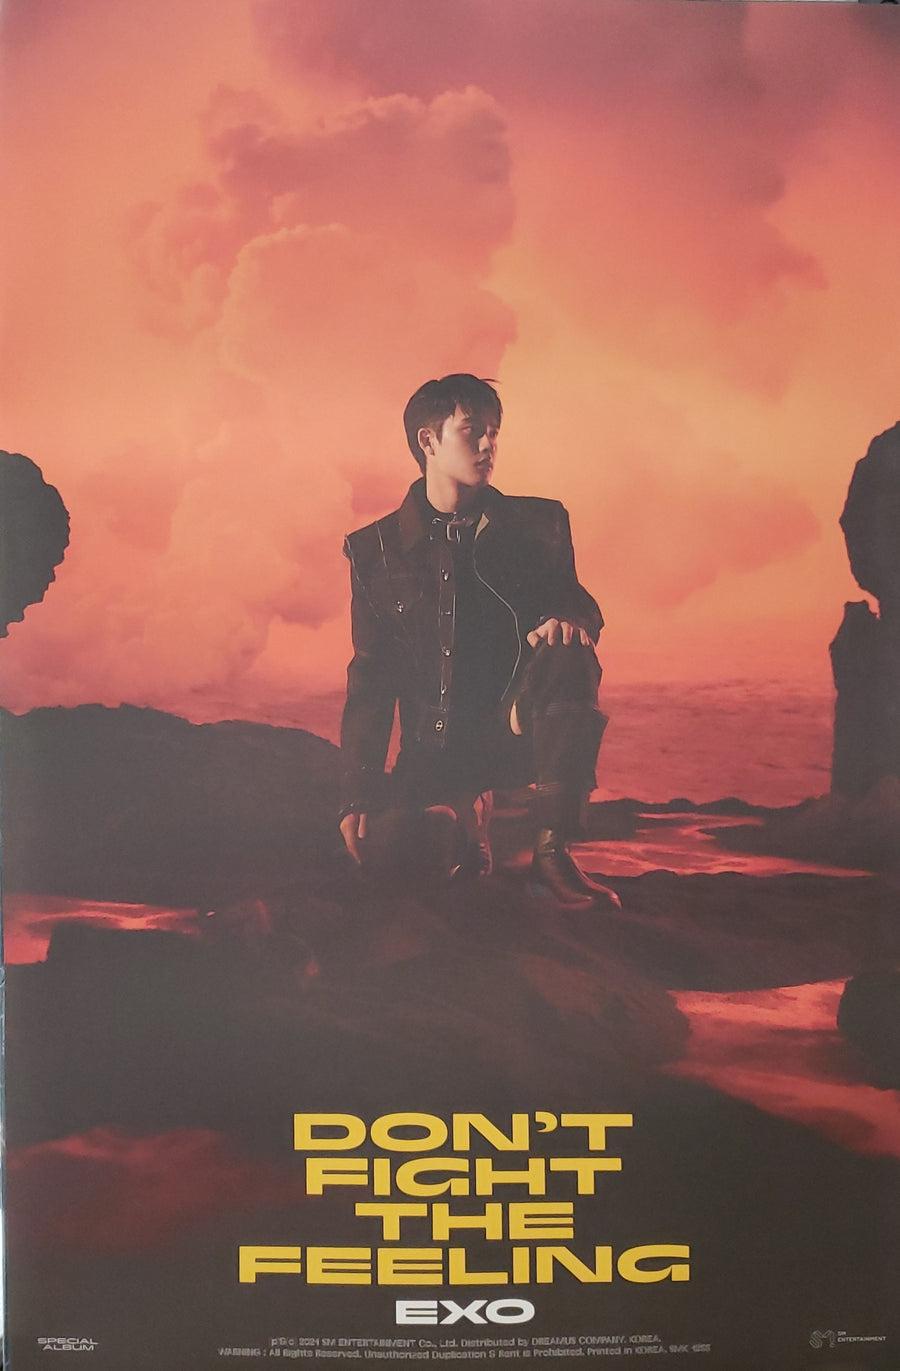 EXO SPECIAL ALBUM DON'T FIGHT THE FEELING (PHOTOBOOK VER 1) Official Poster - D.O. Version